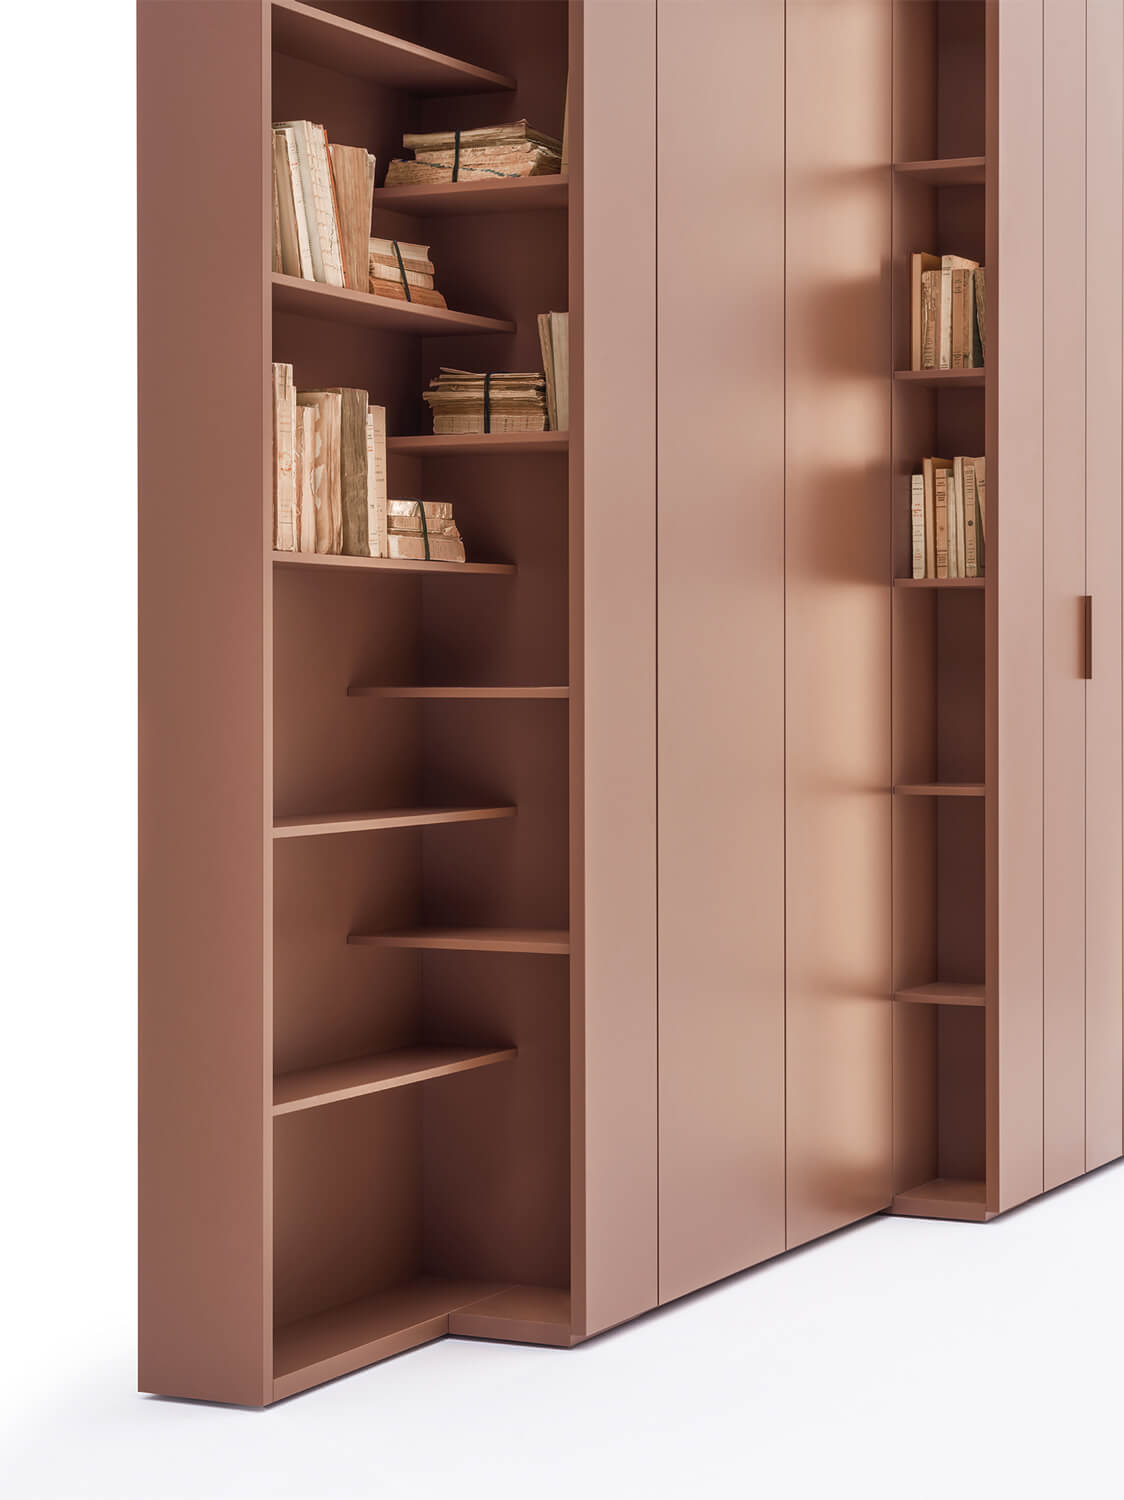 Detail of a Core closet using different depths and side modules to increase storage space.